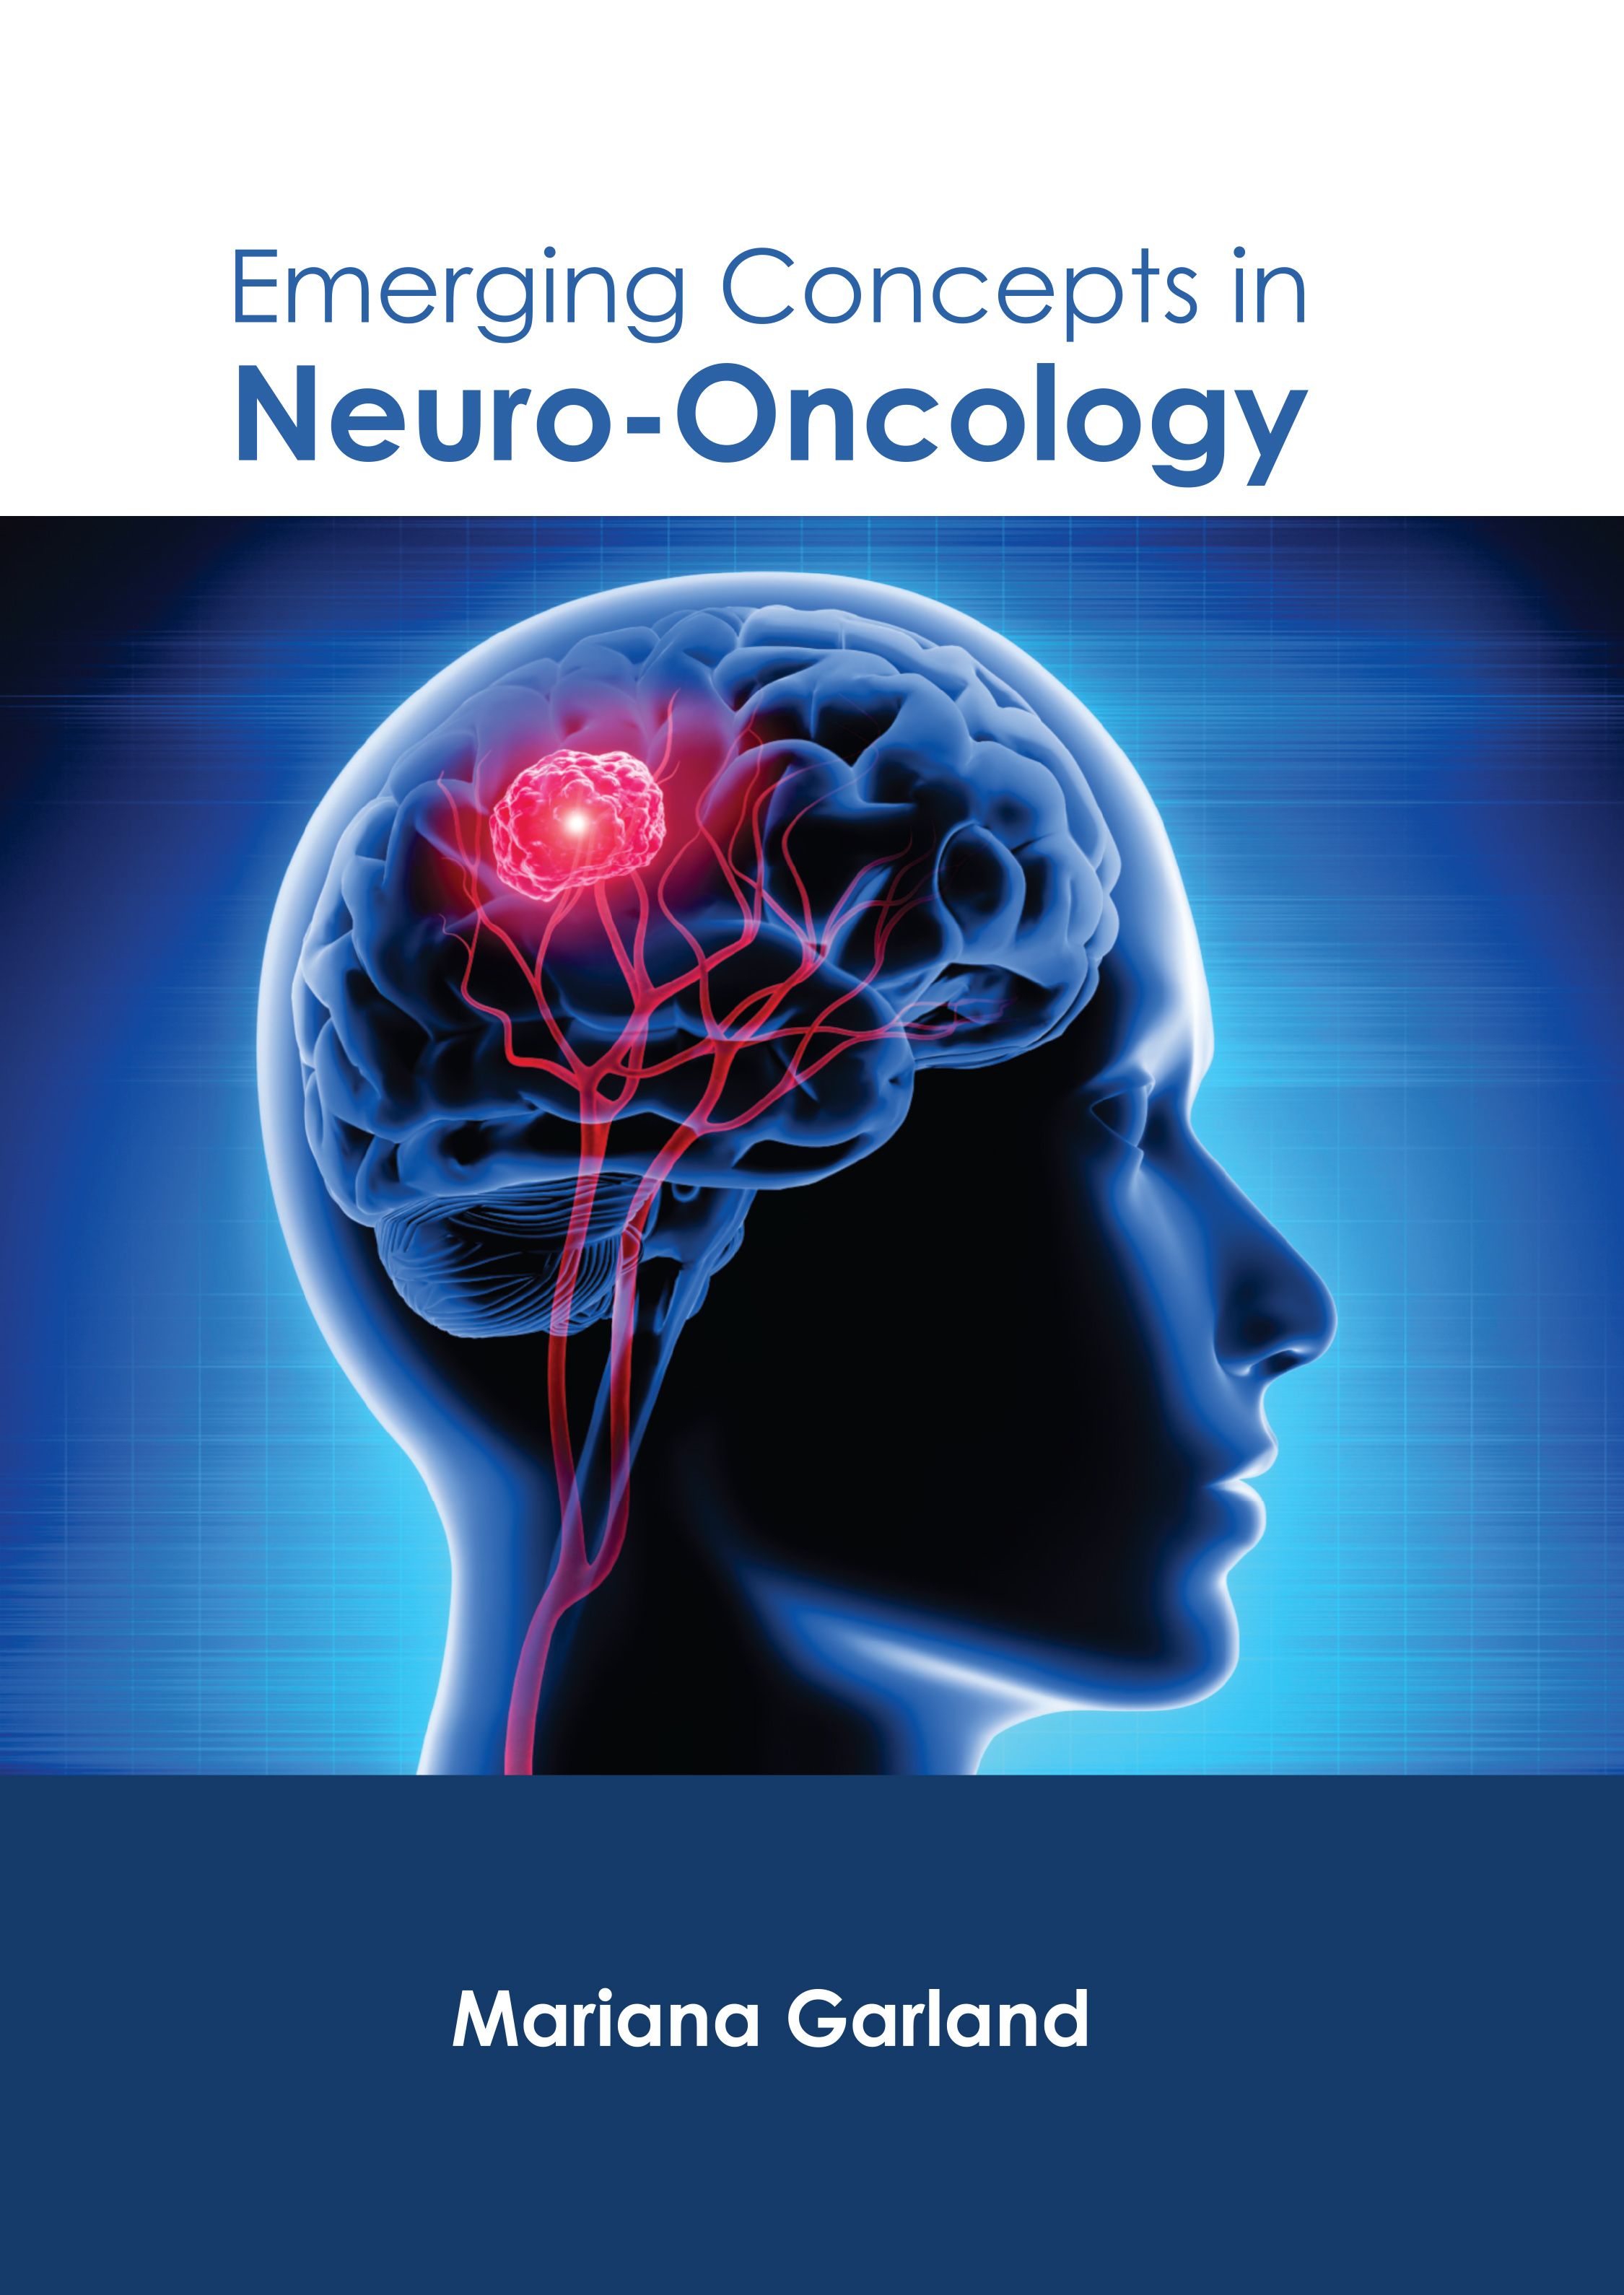 EMERGING CONCEPTS IN NEURO-ONCOLOGY